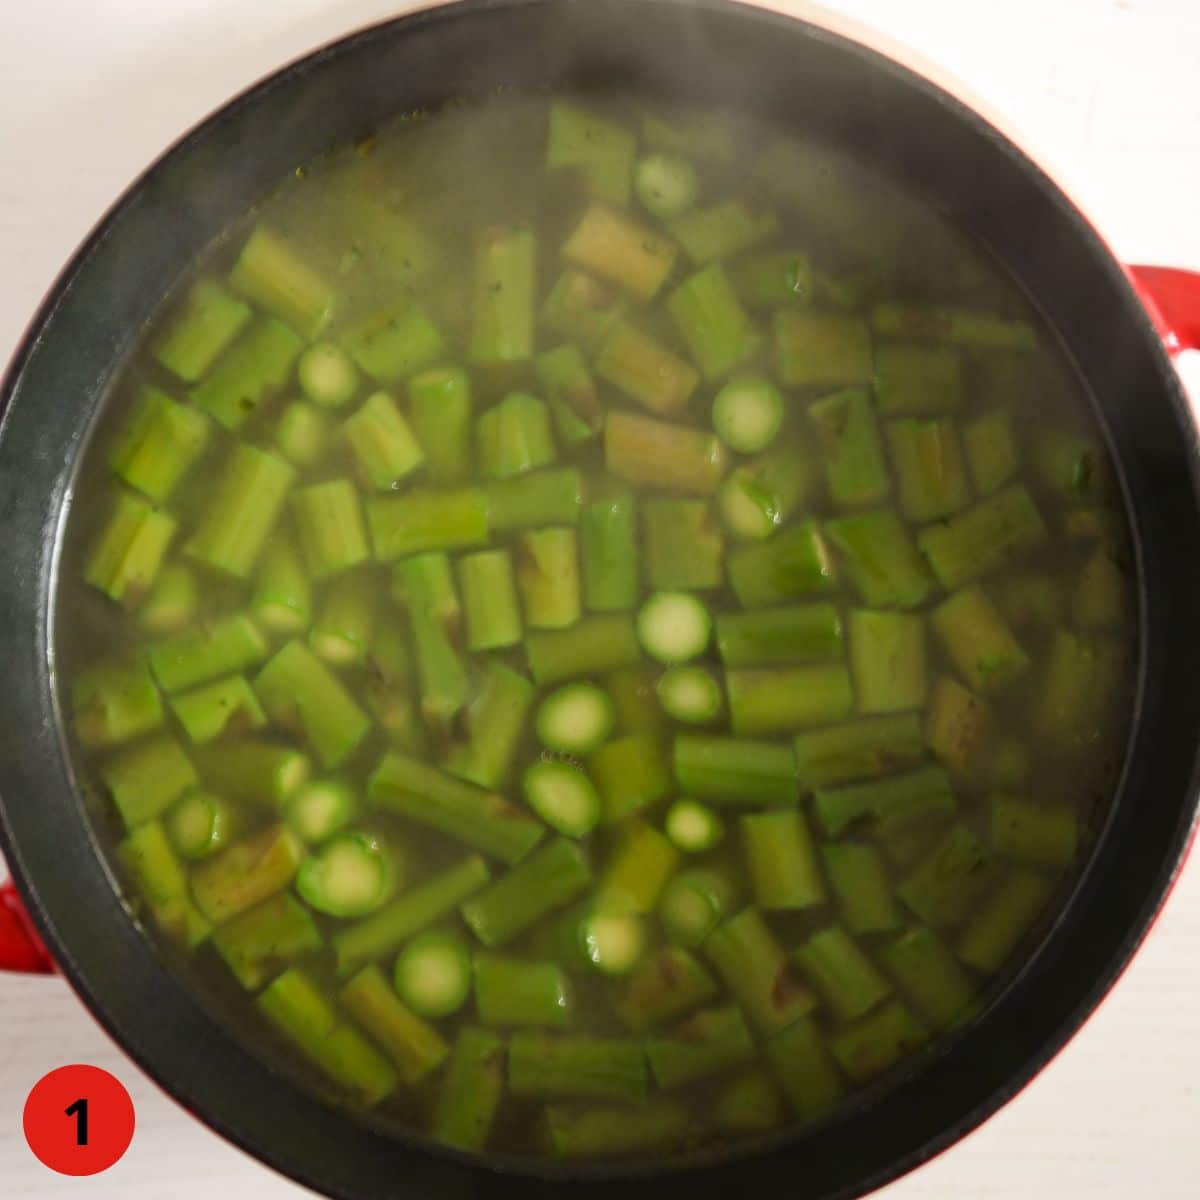 chopped green asparagus cooking in a red pot.